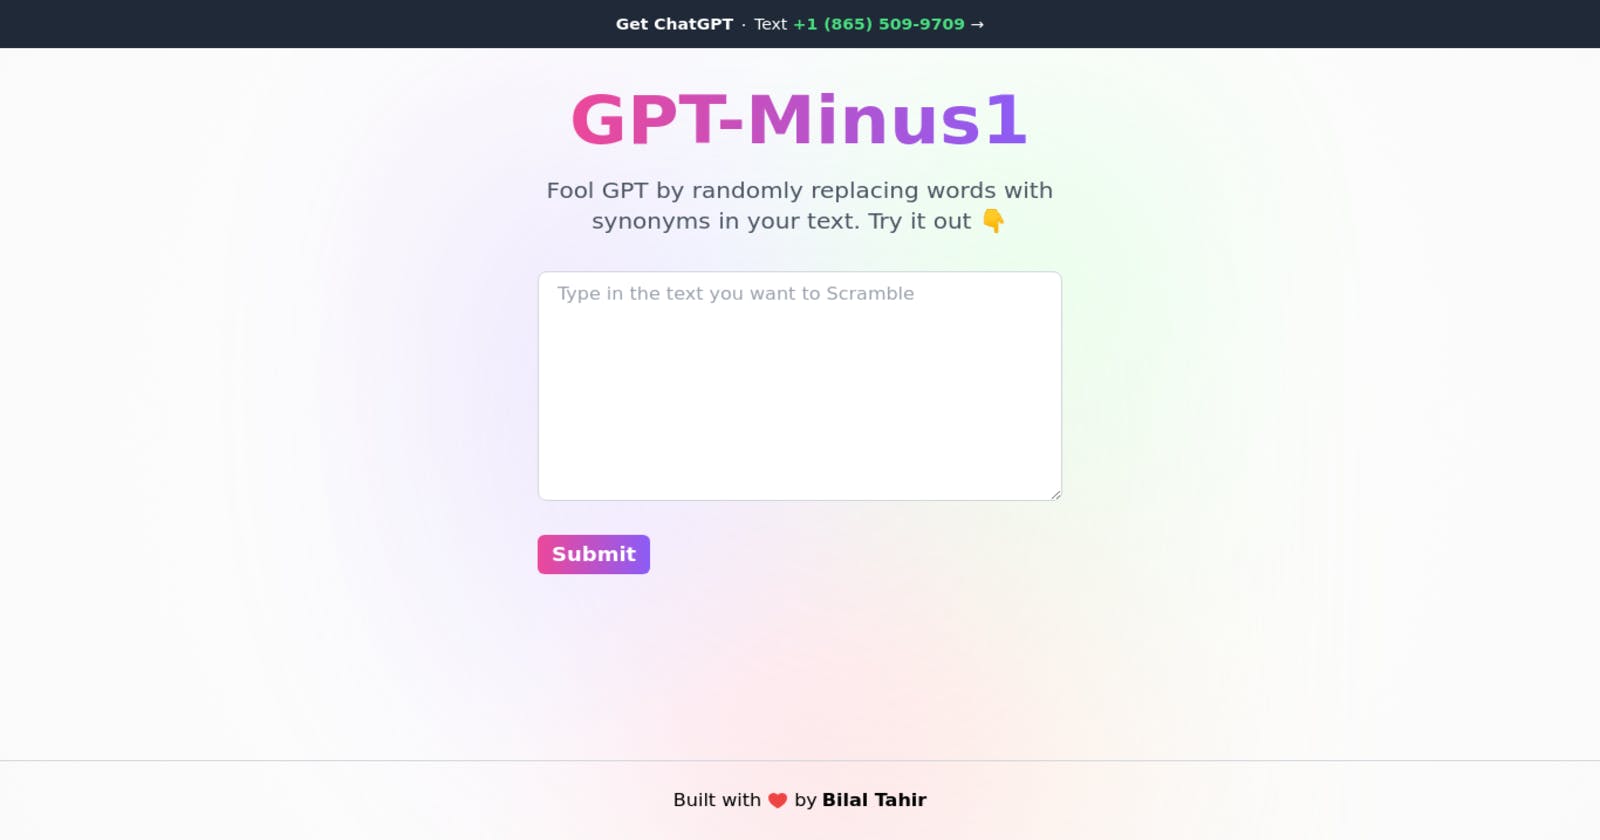 Unleash Creativity with GPT-Minus1 - Transform Your Text with Randomly Replaced Synonyms